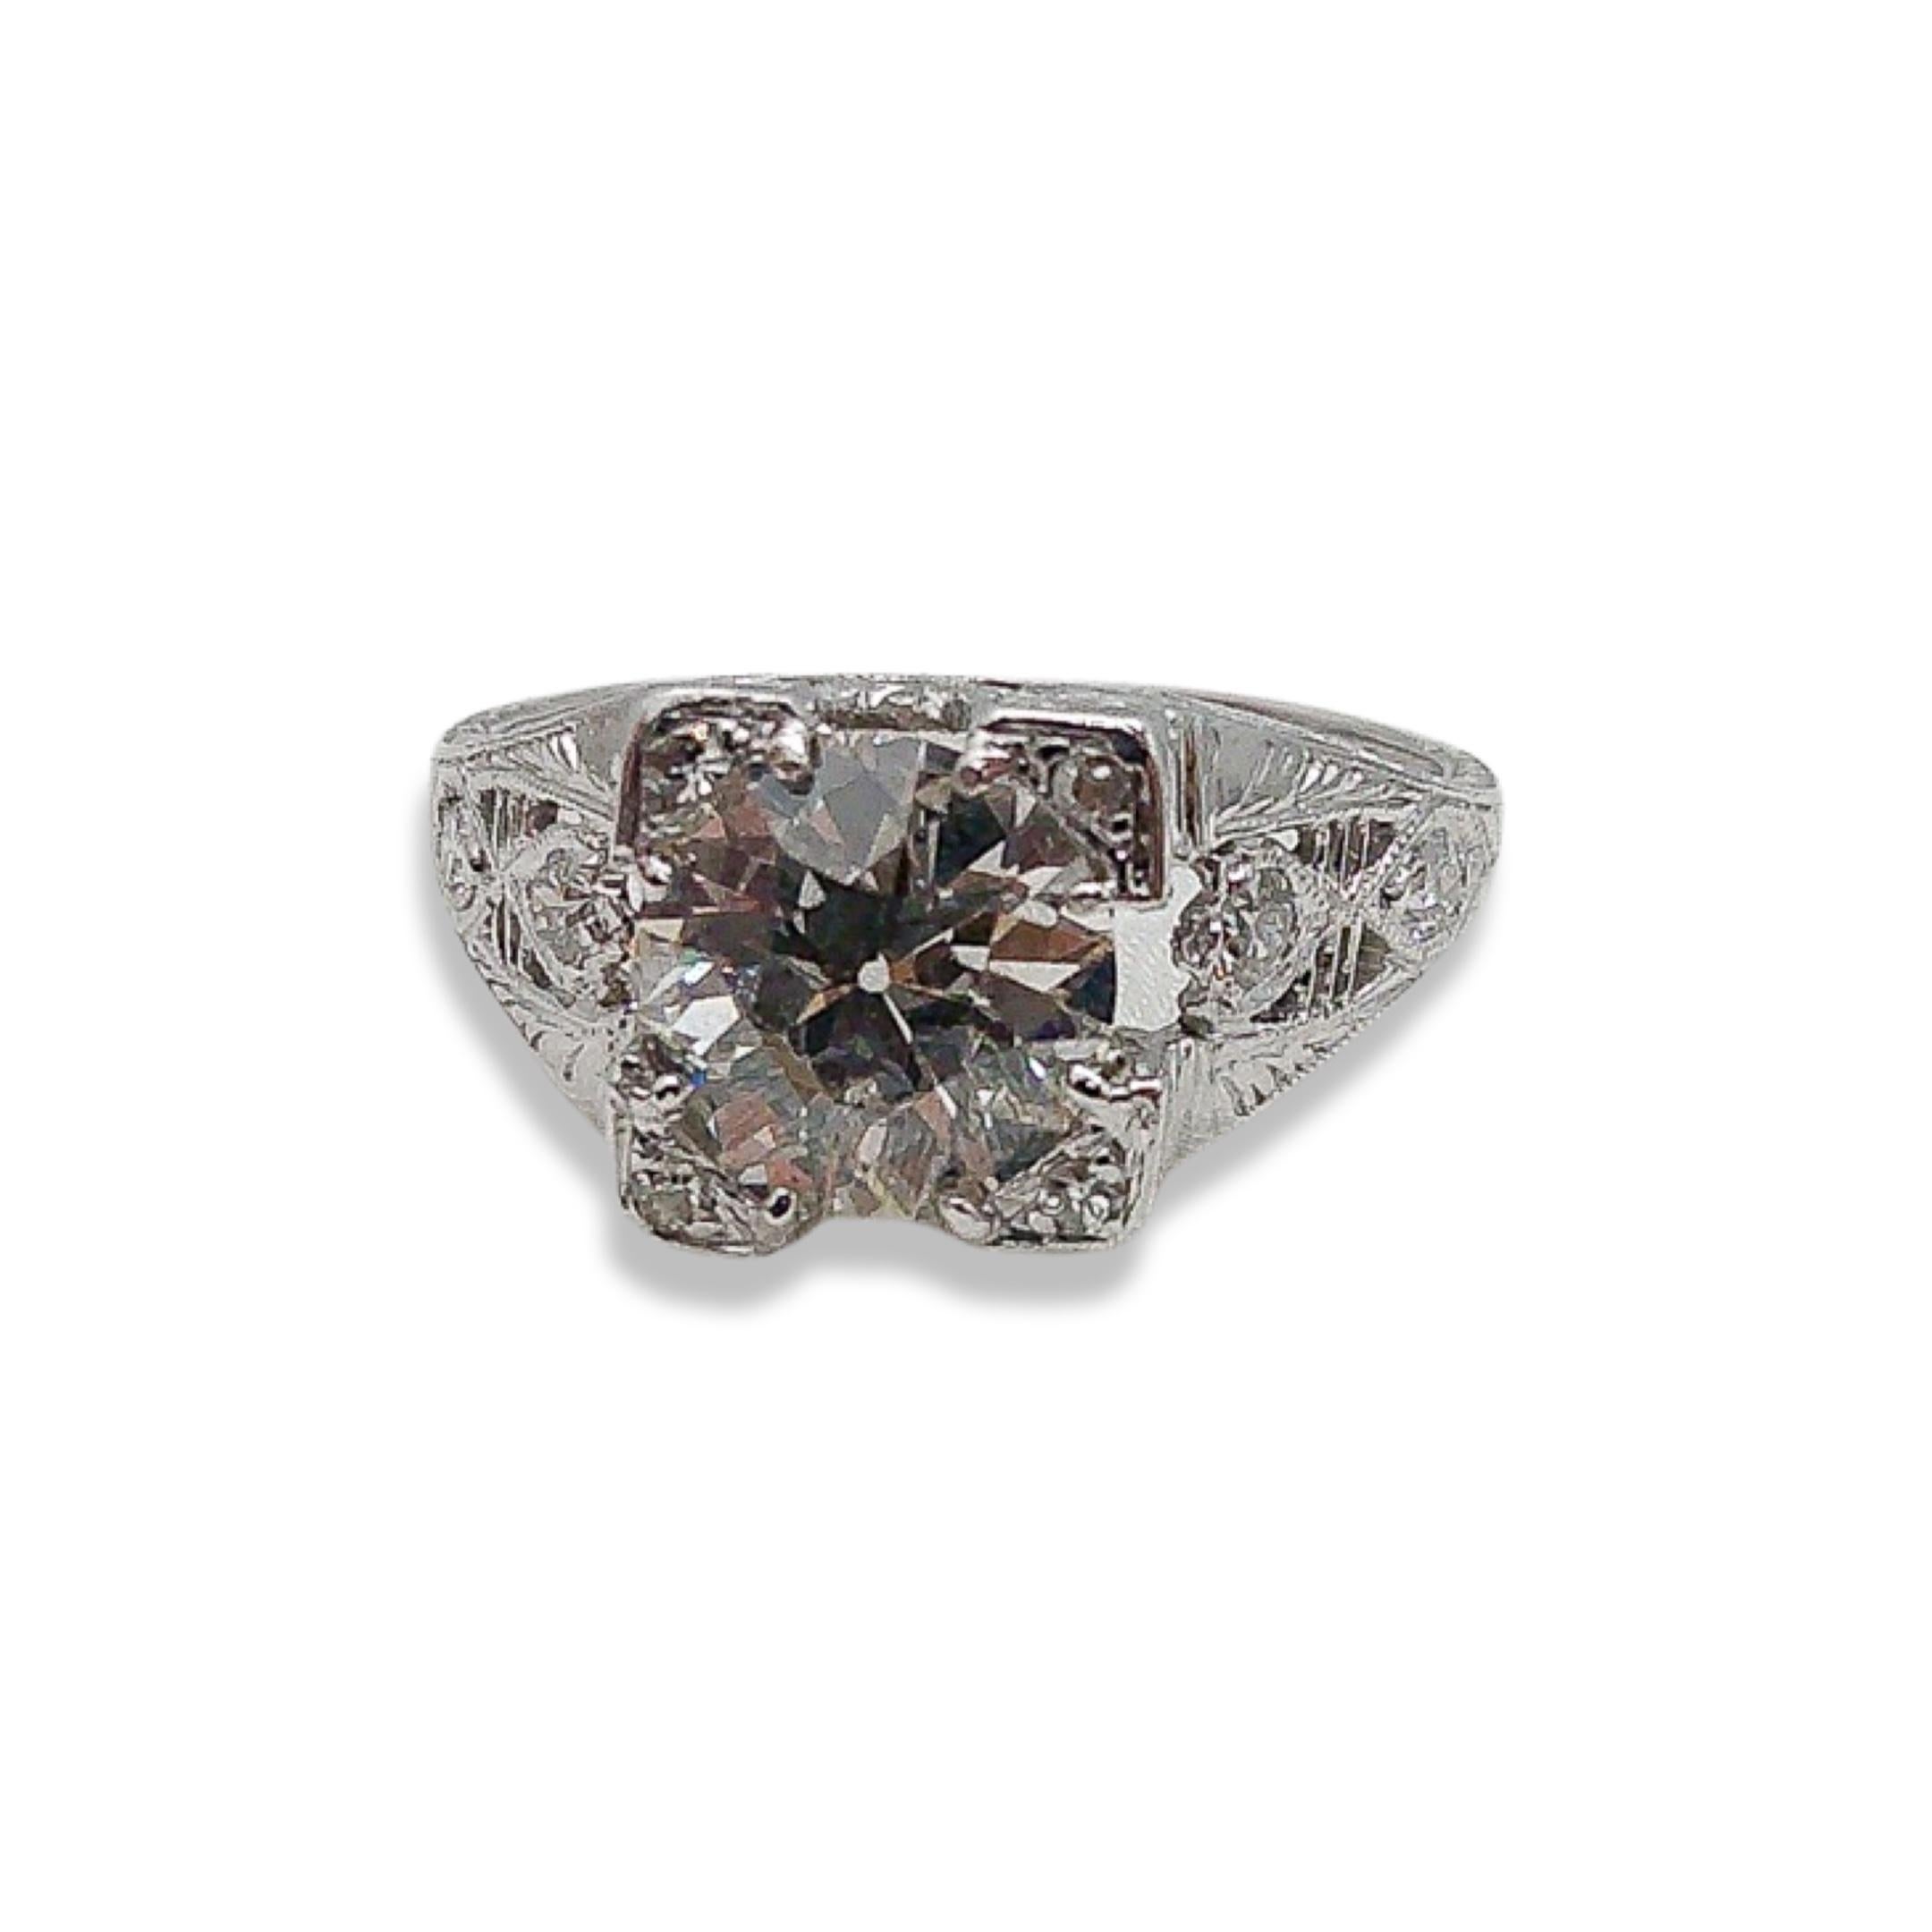 Step back in time and bask in the glamorous shimmer of the Roaring Twenties with this 1.47CT Art Deco Diamond Ring, exquisitely set in Platinum. A genuine treasure, this ring is an ode to an era when style, sophistication, and lively spirit danced